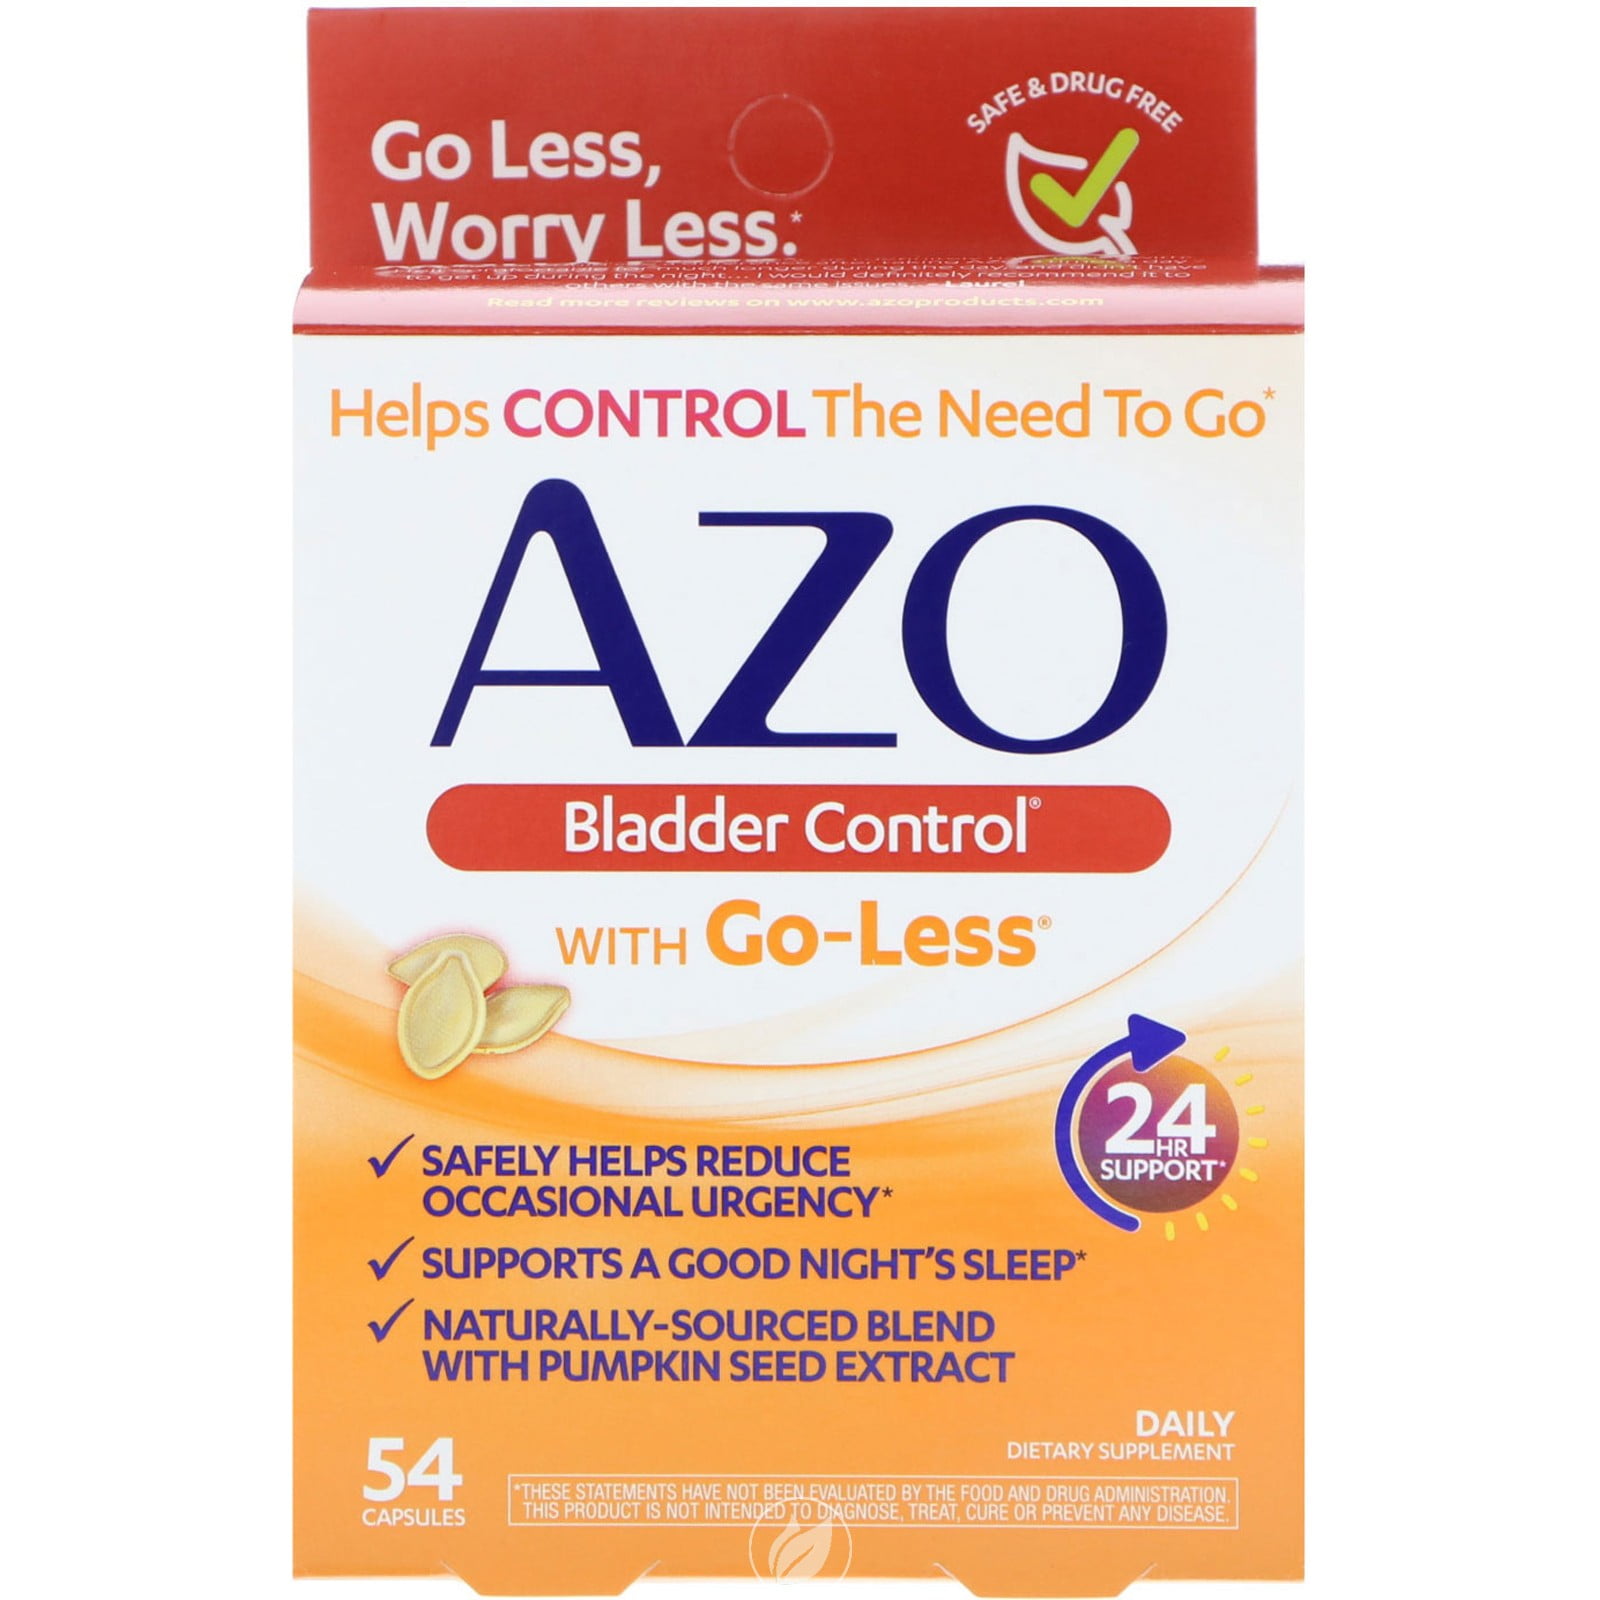 Bladder weakness products